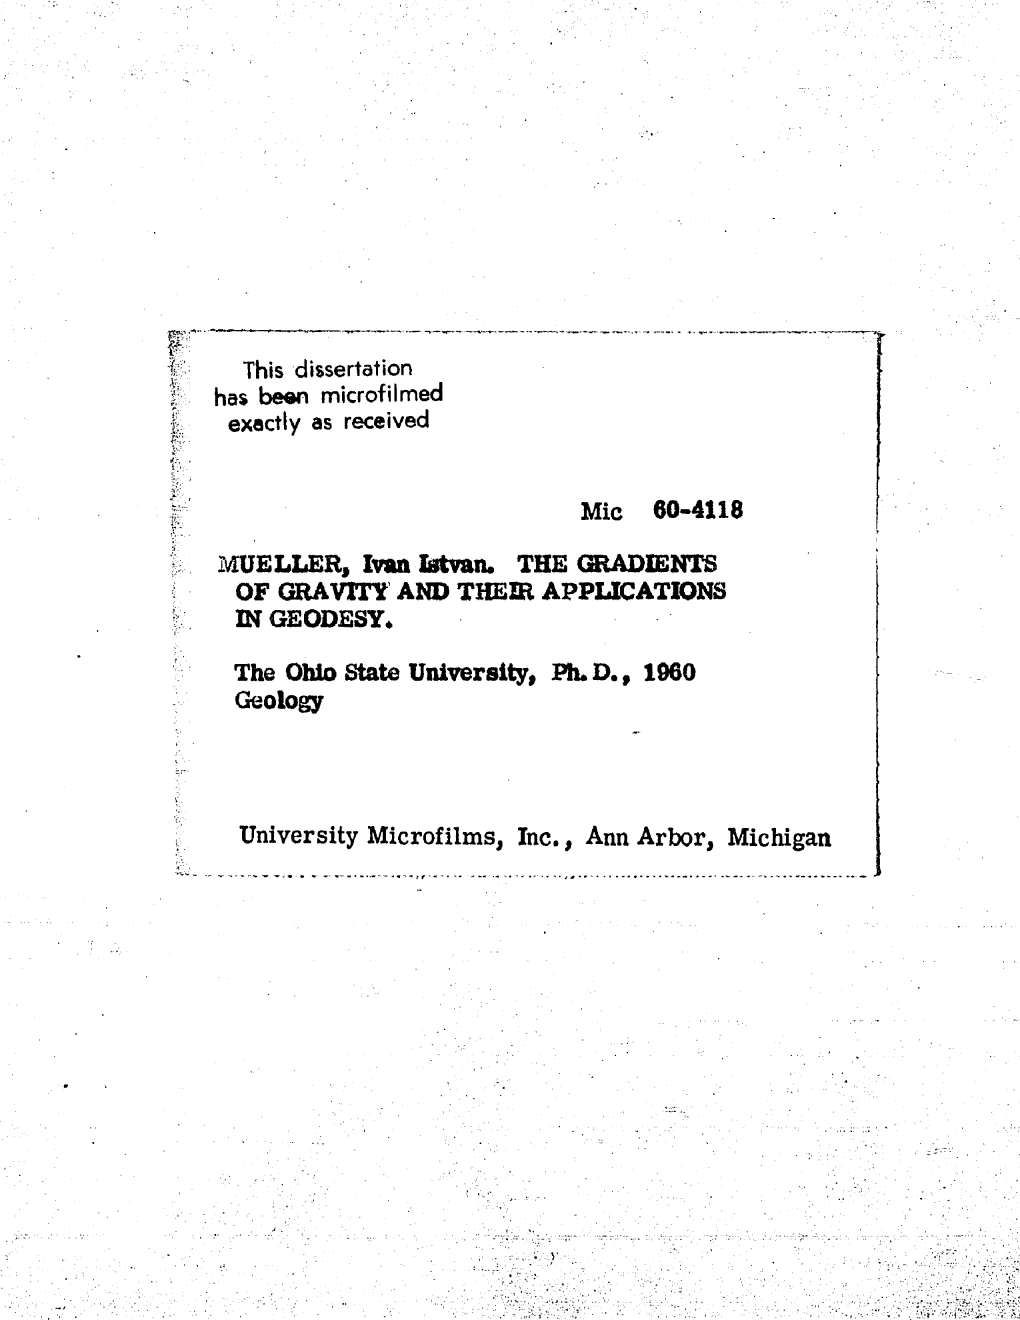 I MUELLER, Ivan Iatvan. the GRADIENTS of GRAVITY and THEIR APPLICATIONS in GEODESY* the Ohio State University, Ph.D., 1960 Geology